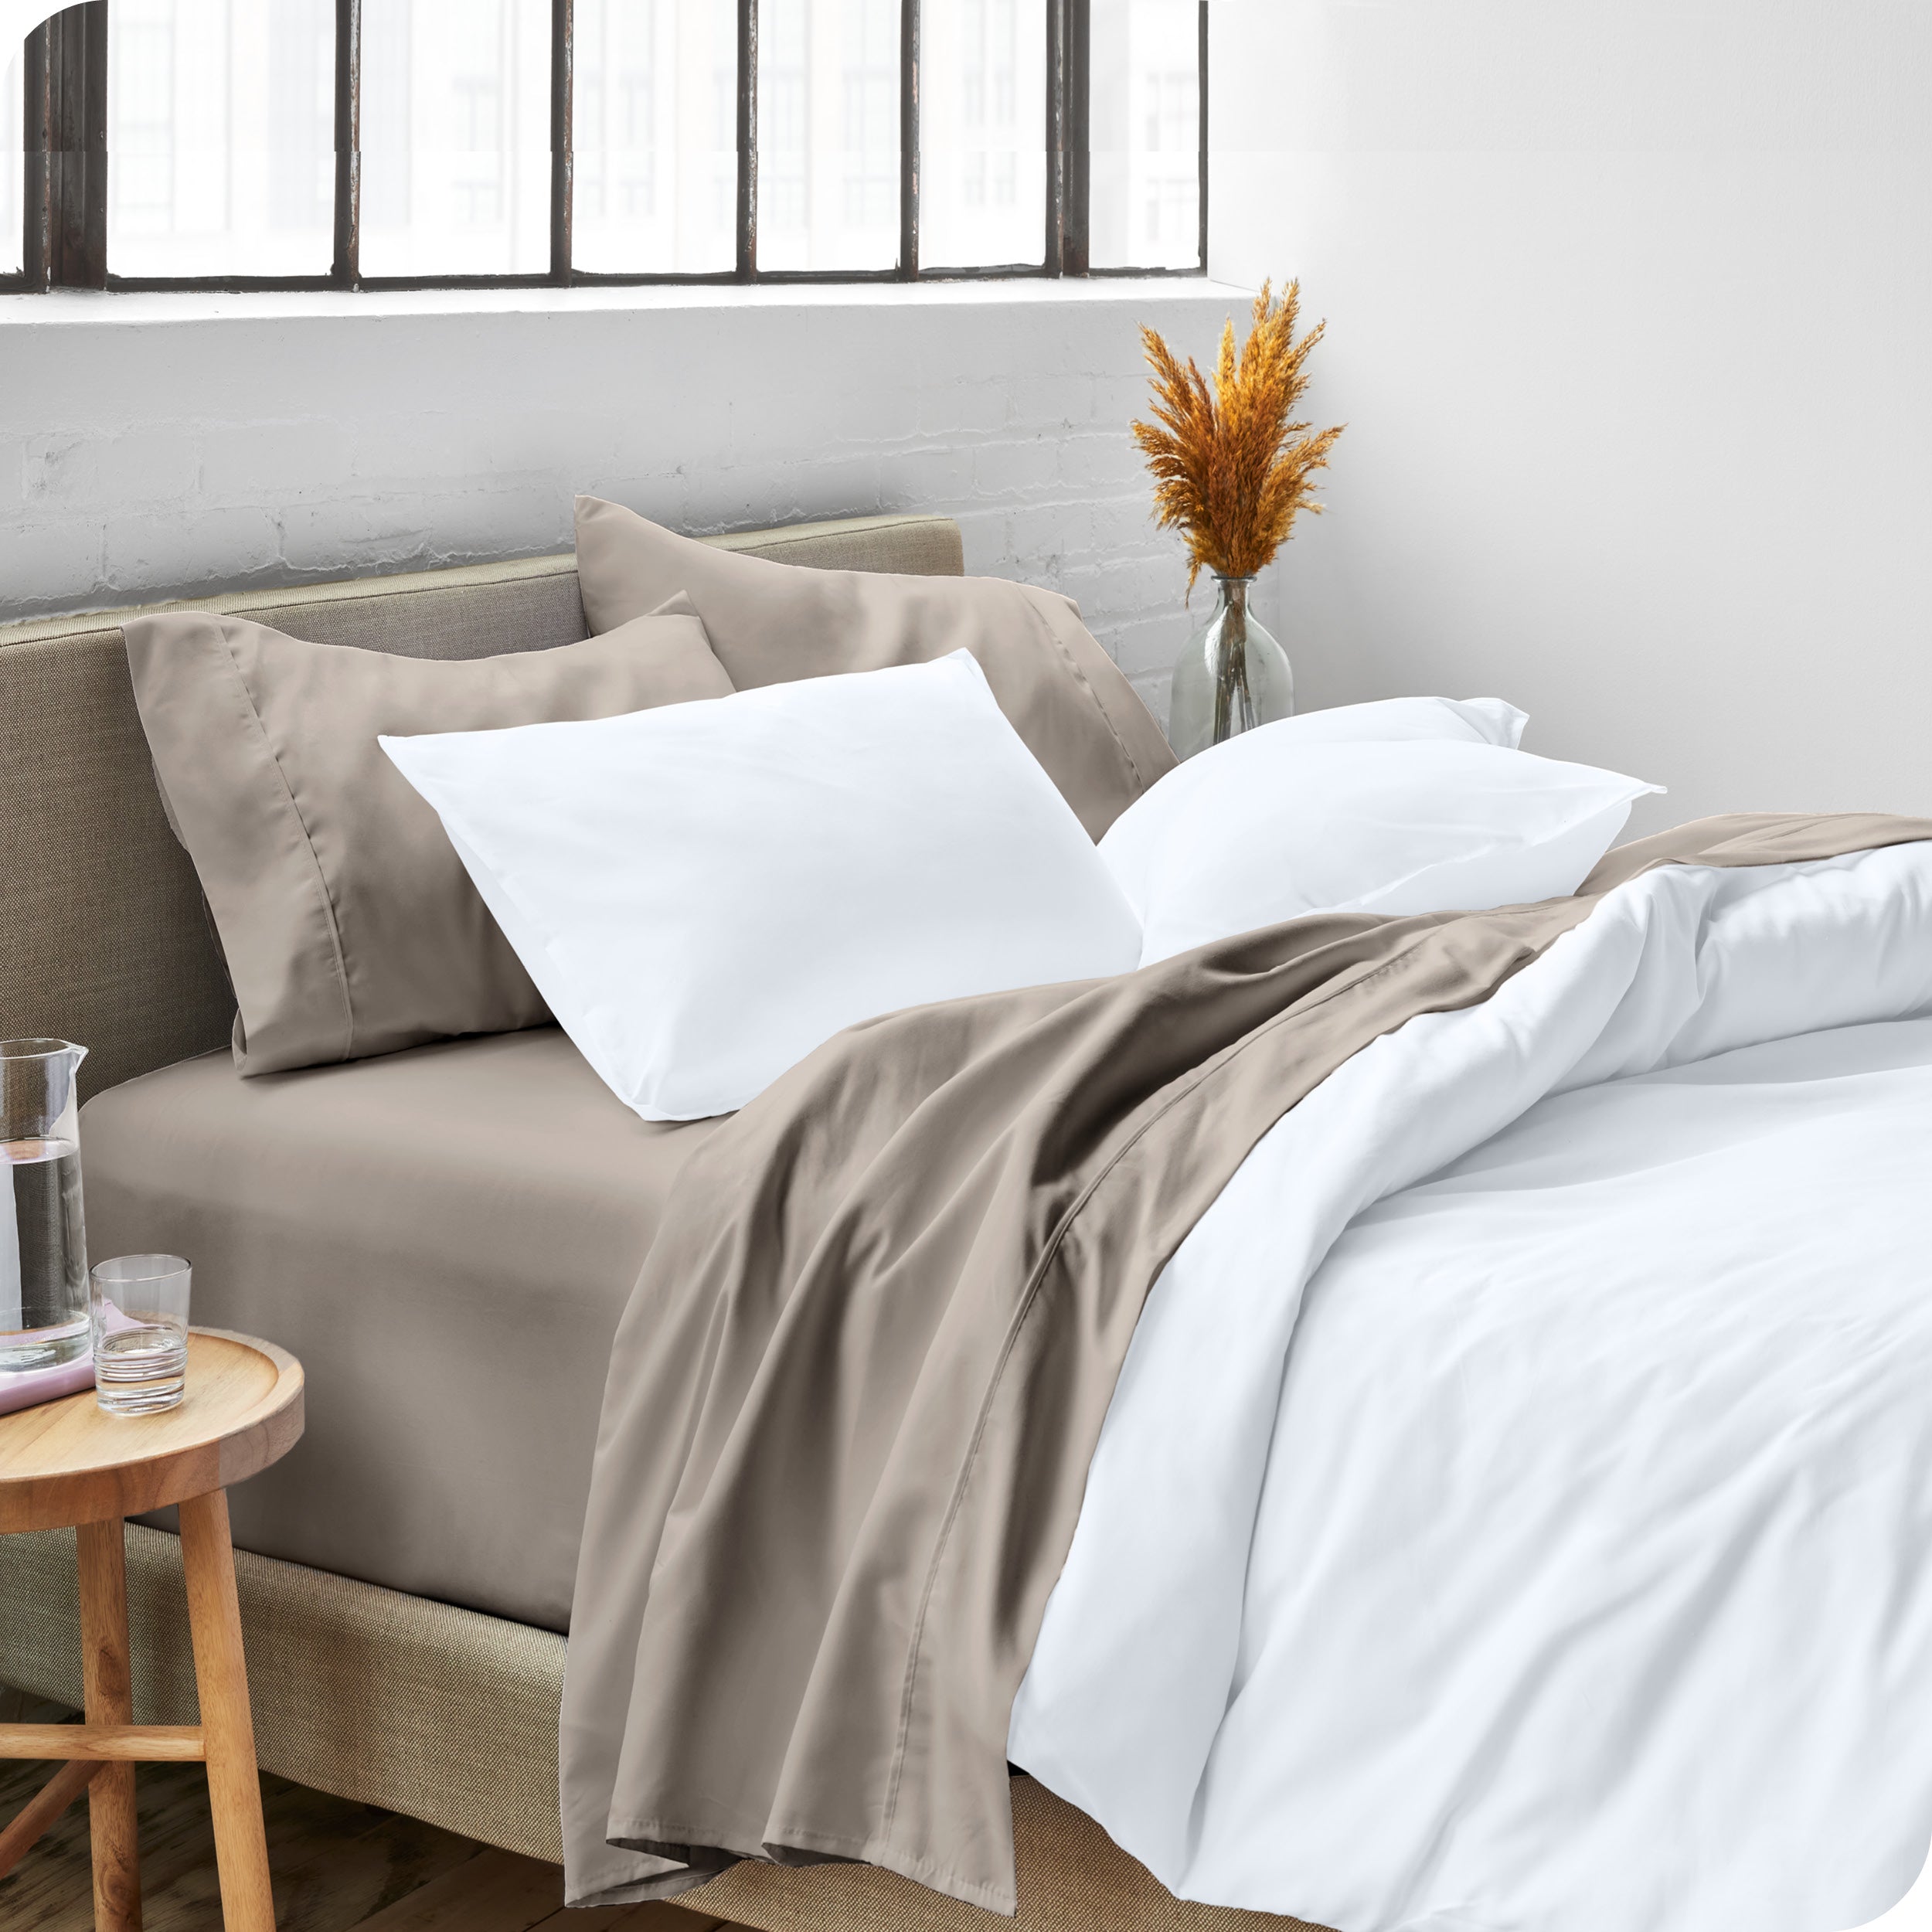 A modern bed made with a microfiber sheet set and duvet set. The duvet set and sheet set are folded over part way down the bed.